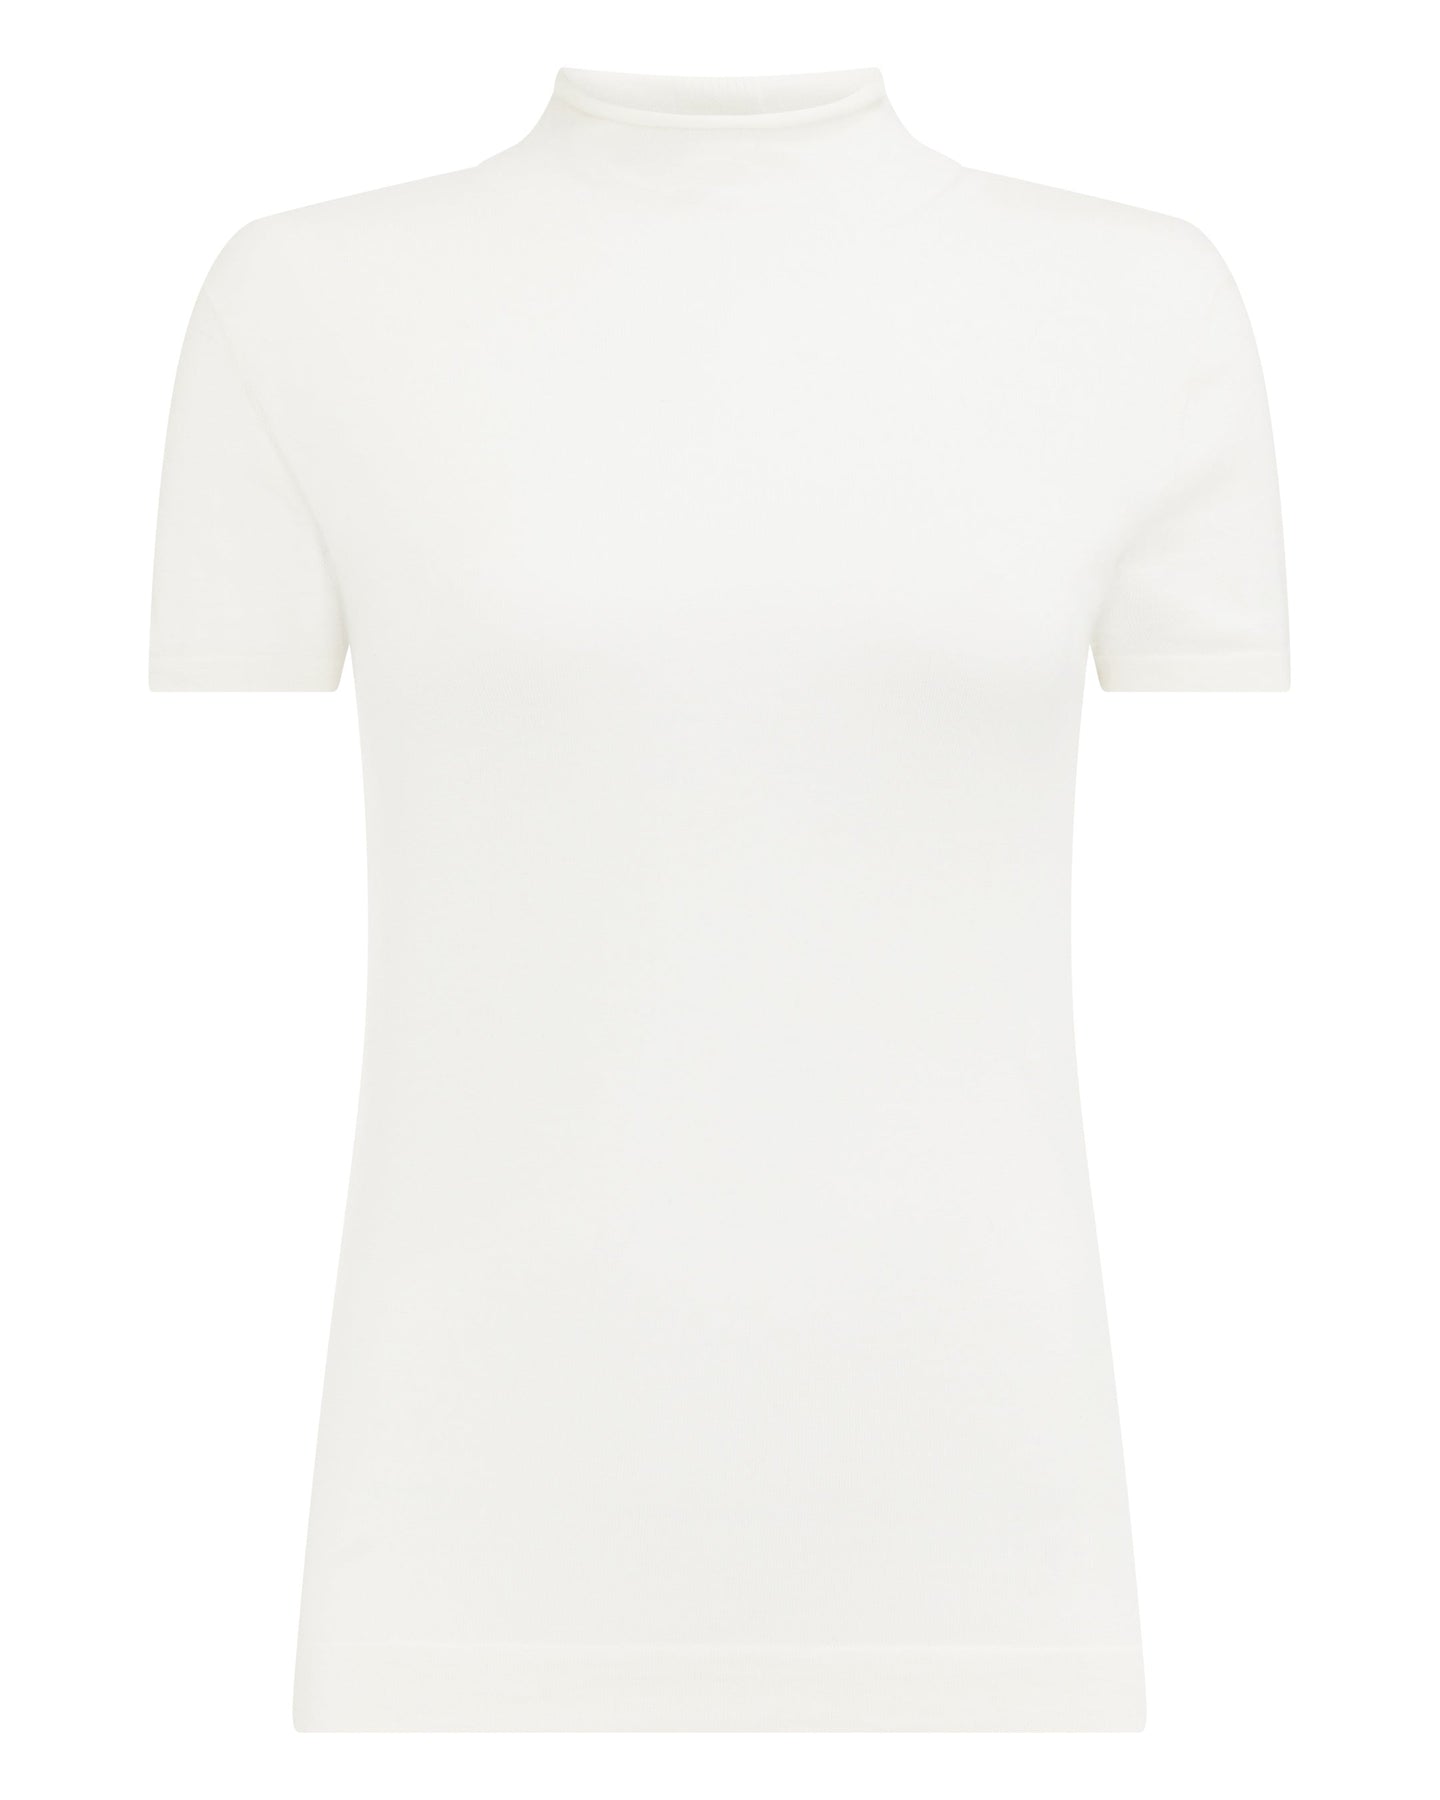 N.Peal Women's Superfine Mock Neck Cashmere T-Shirt New Ivory White